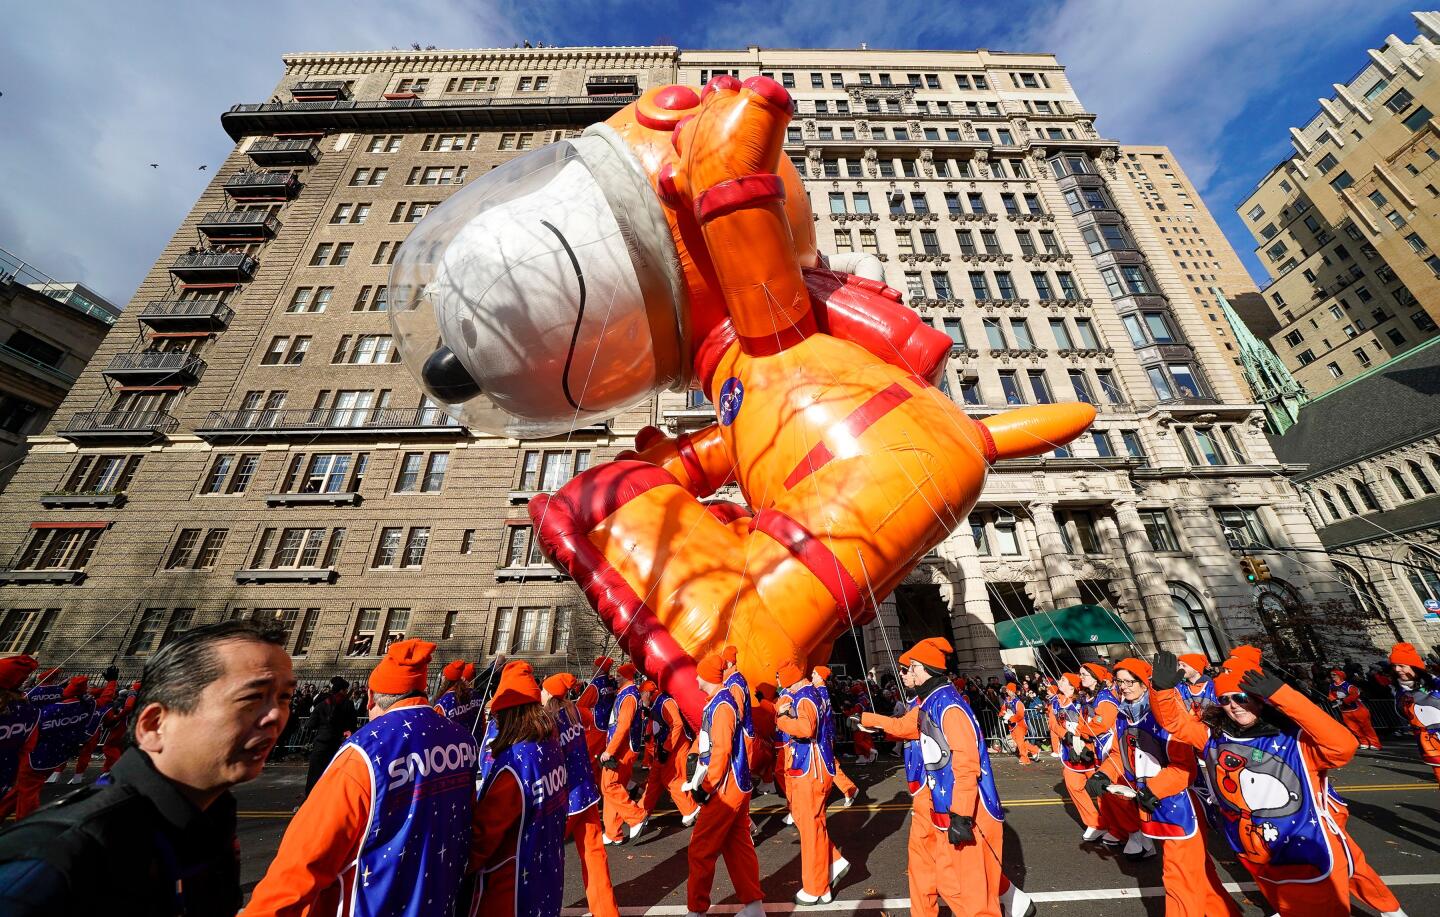 93rd annual Macy's Thanksgiving Day Parade